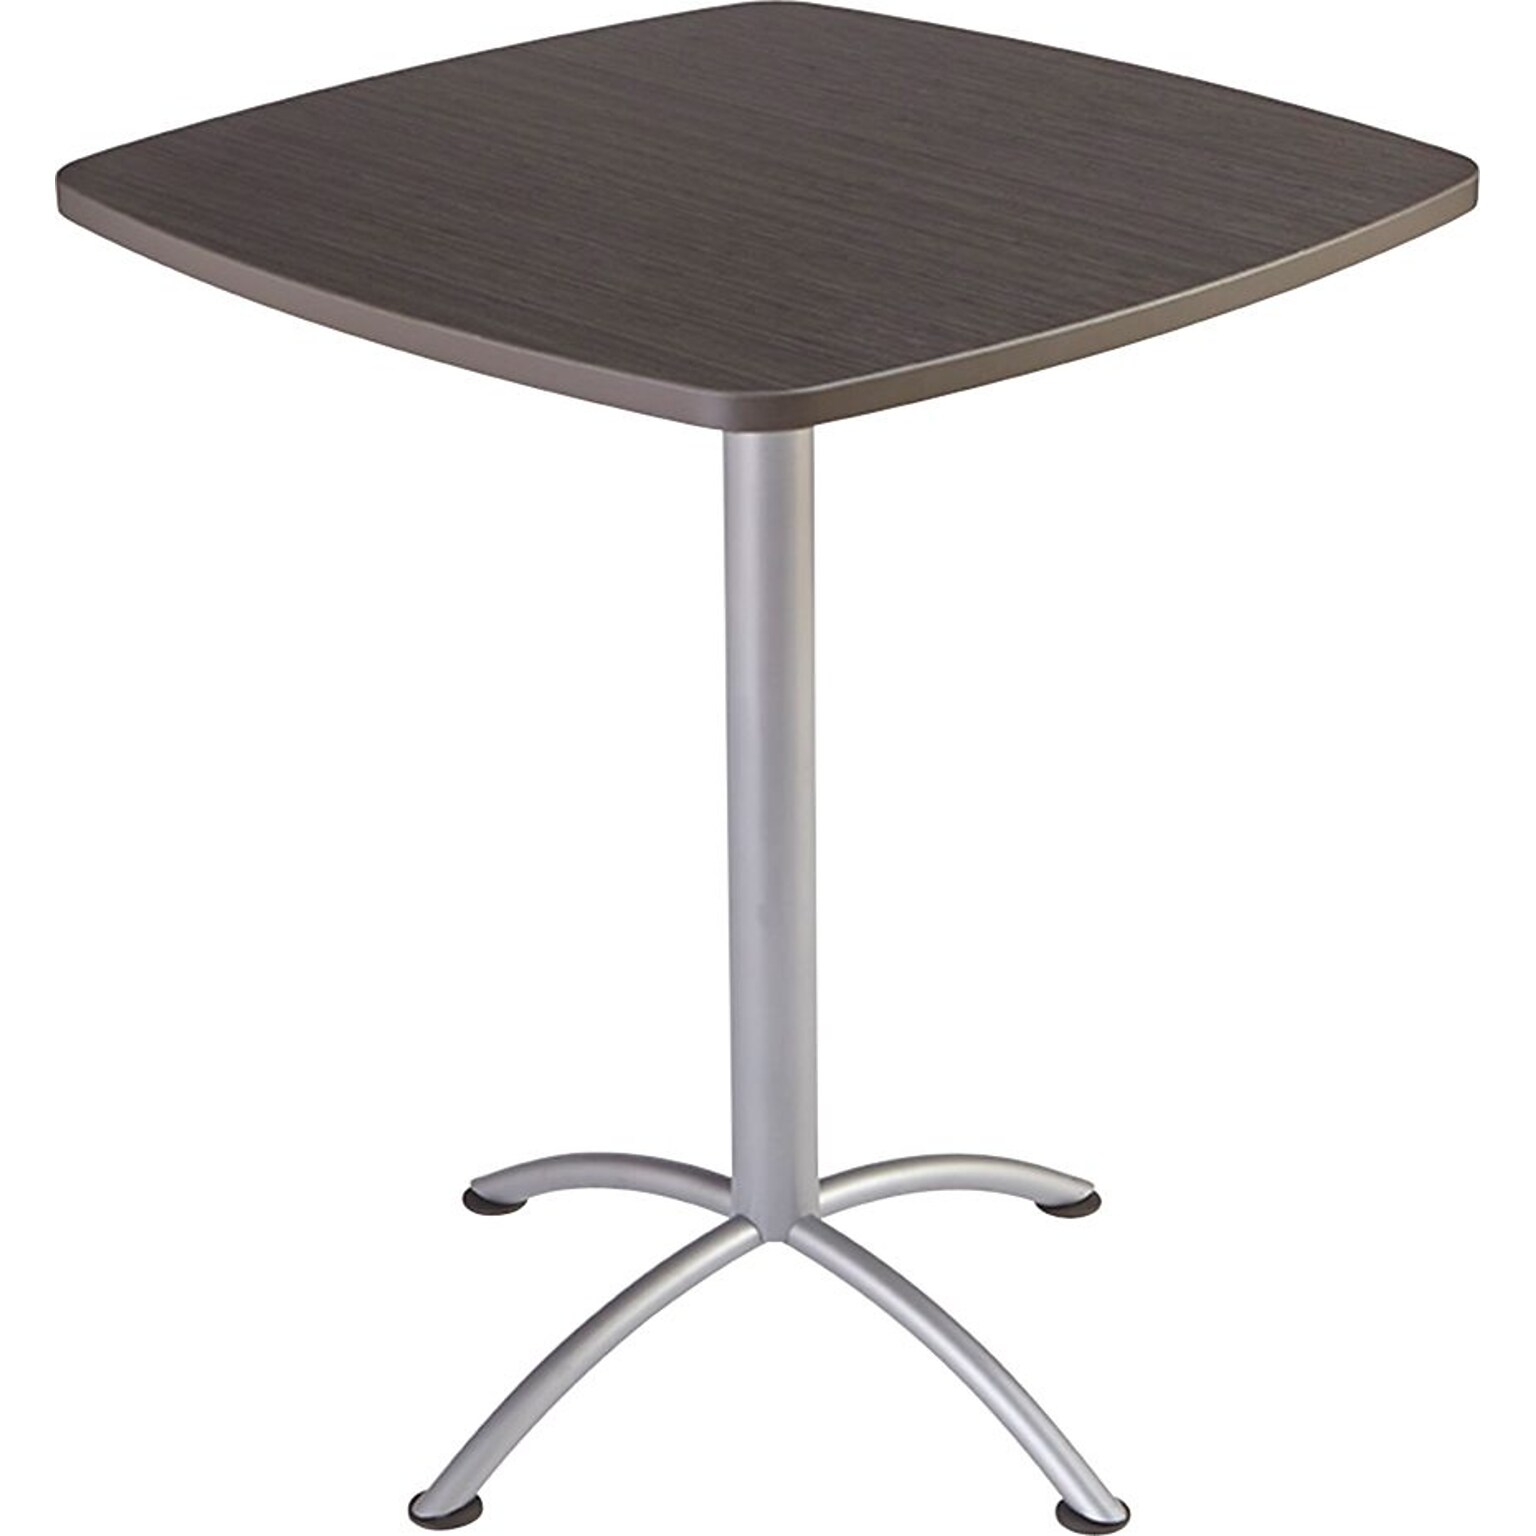 Iceberg iLand Square Edgeband Breakroom Table, Gray Walnut with Silver Base, 42H x 36W x 36D